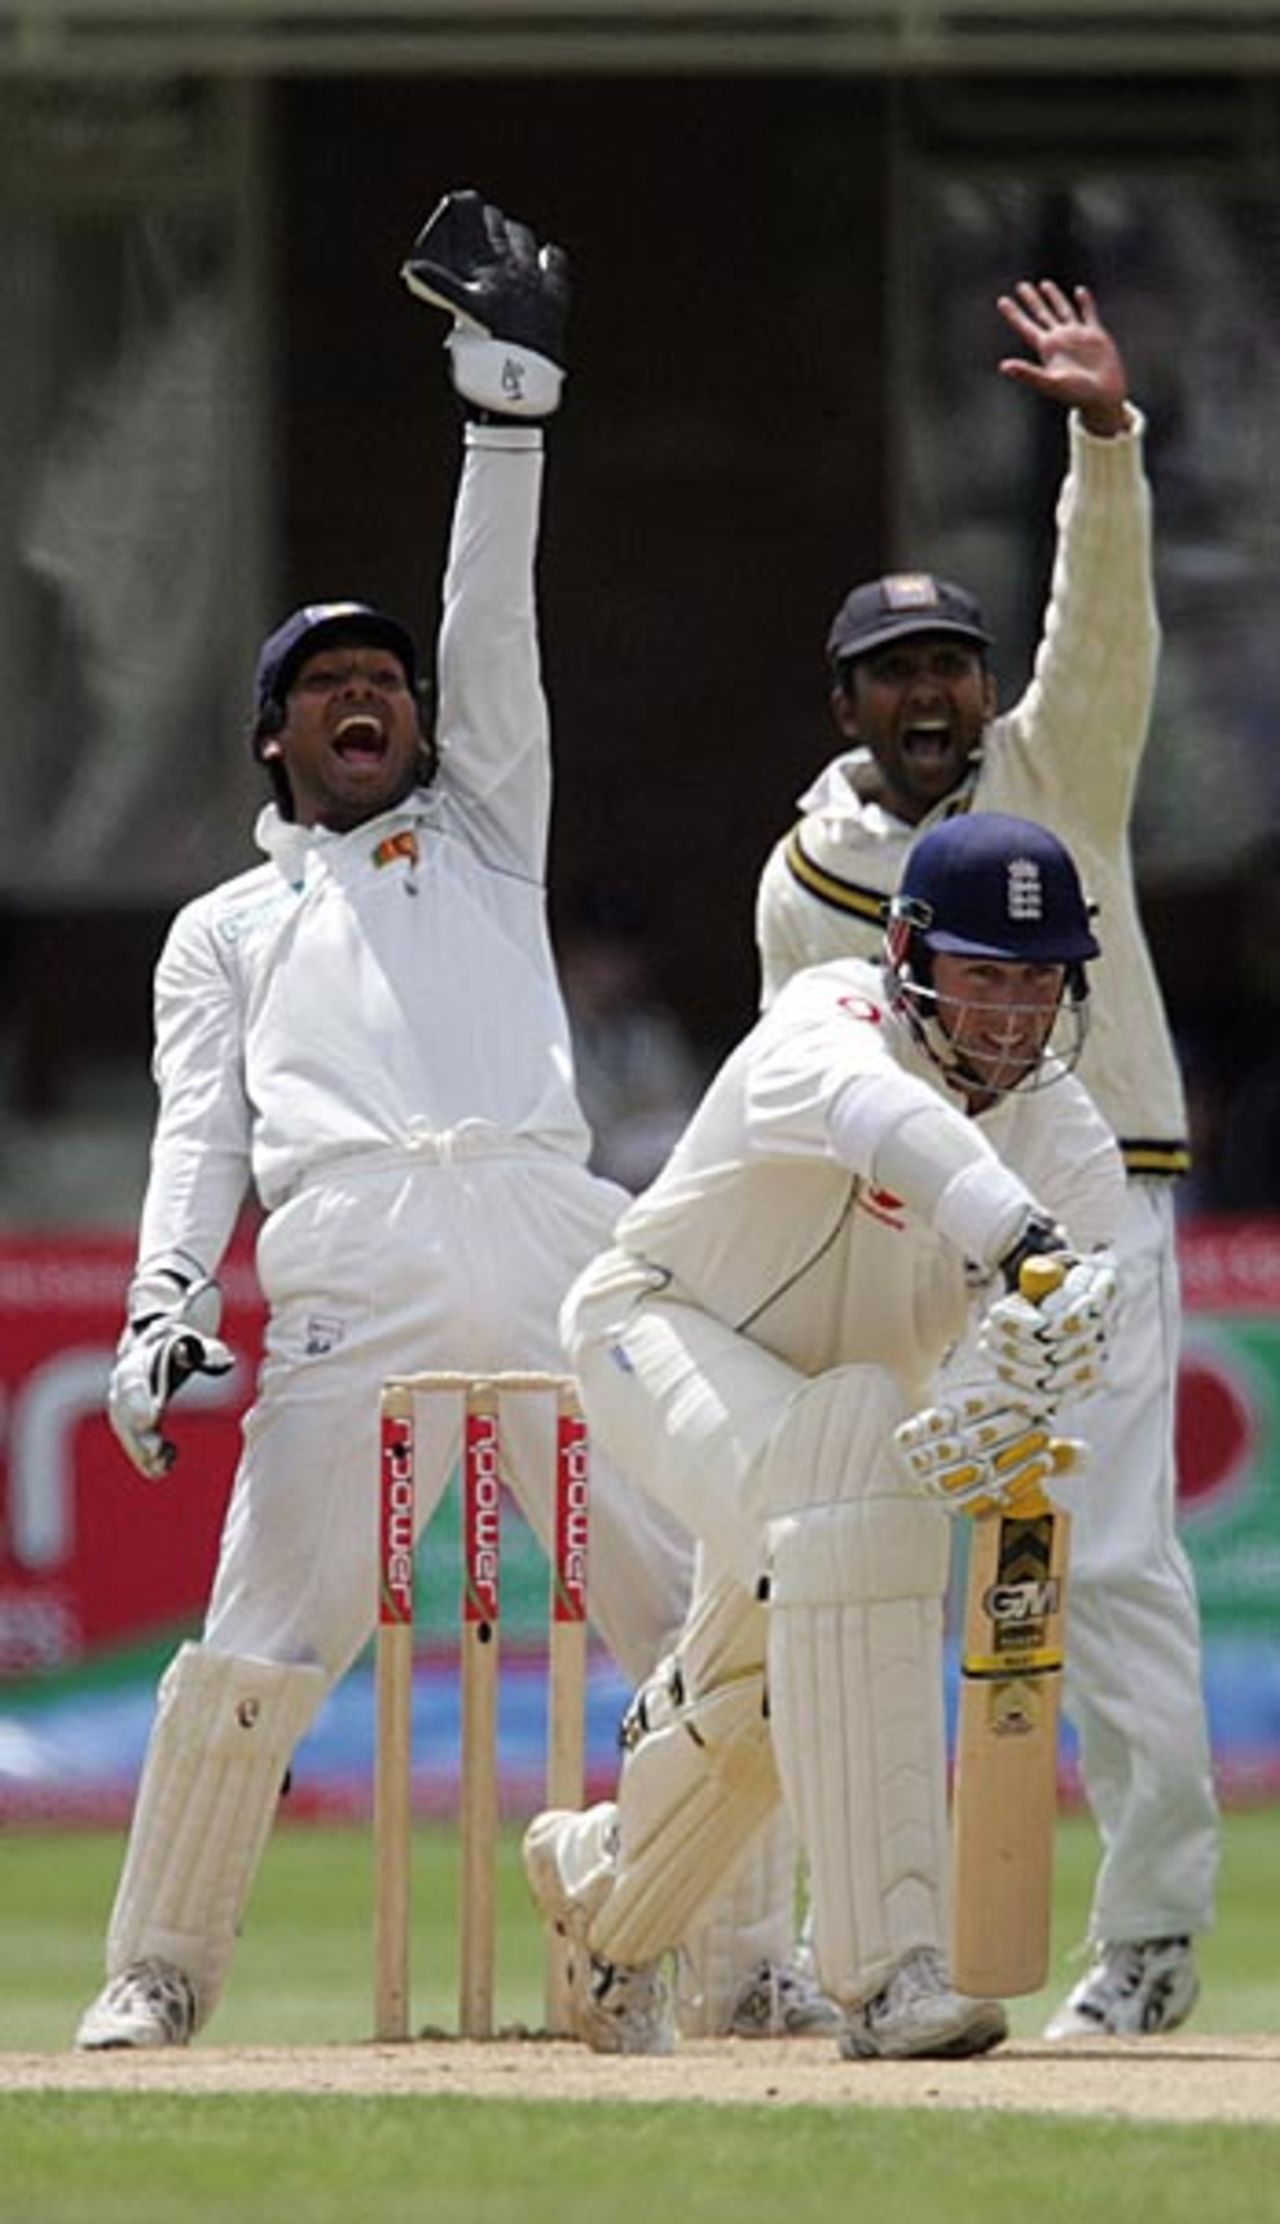 Marcus Trescothick is trapped lbw for a duck, England v Sri Lanka, 2nd Test, Edgbaston, May 28, 2006